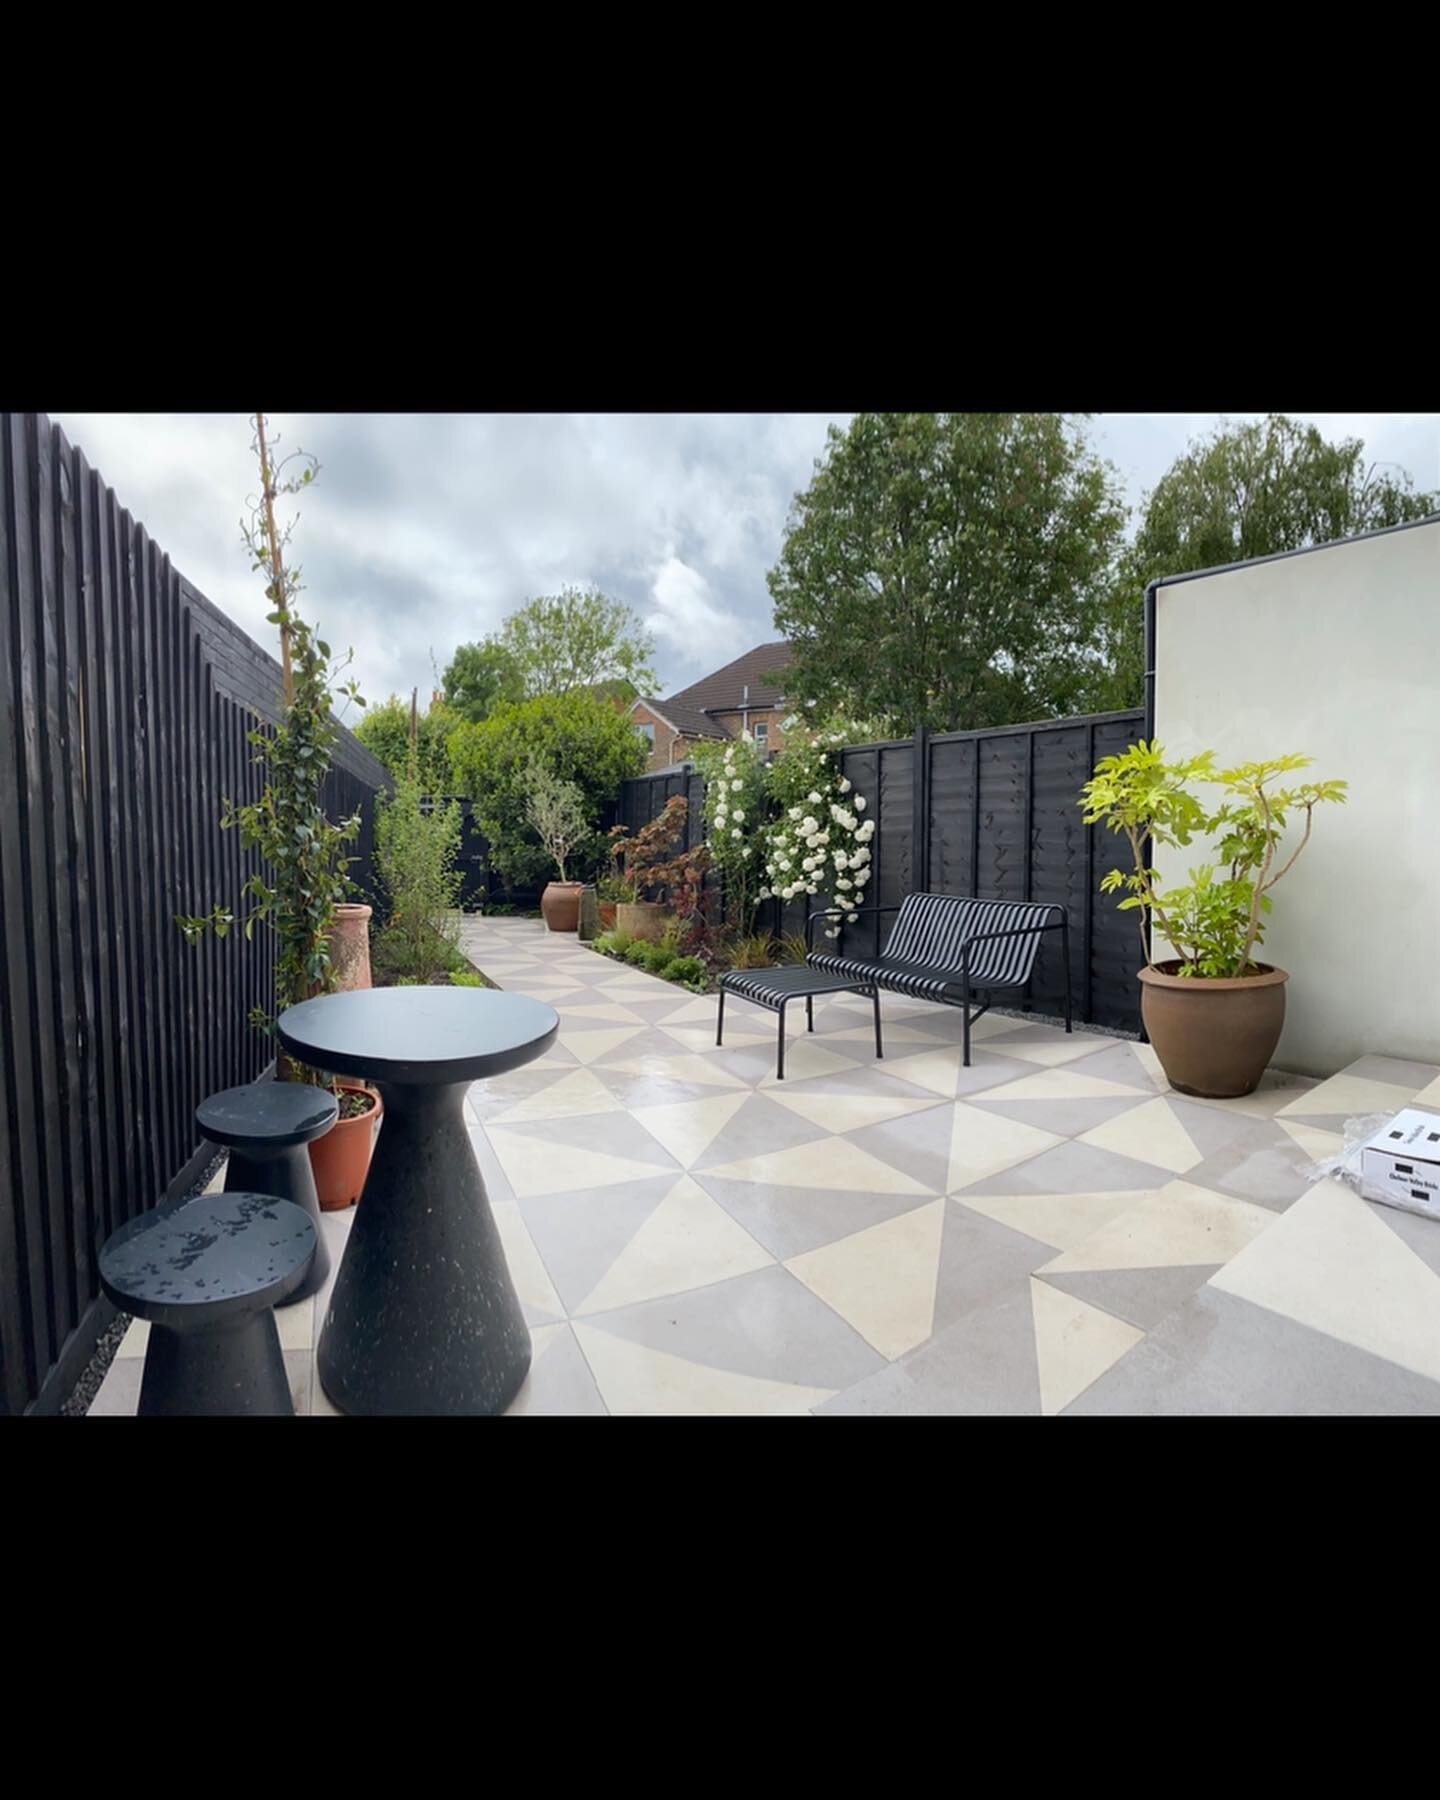 Small garden transformation we recently designed. 
Loving the paving on this one 

#gardendesign #gardentransformation #planting #porcelainpaving #landscaping #garden